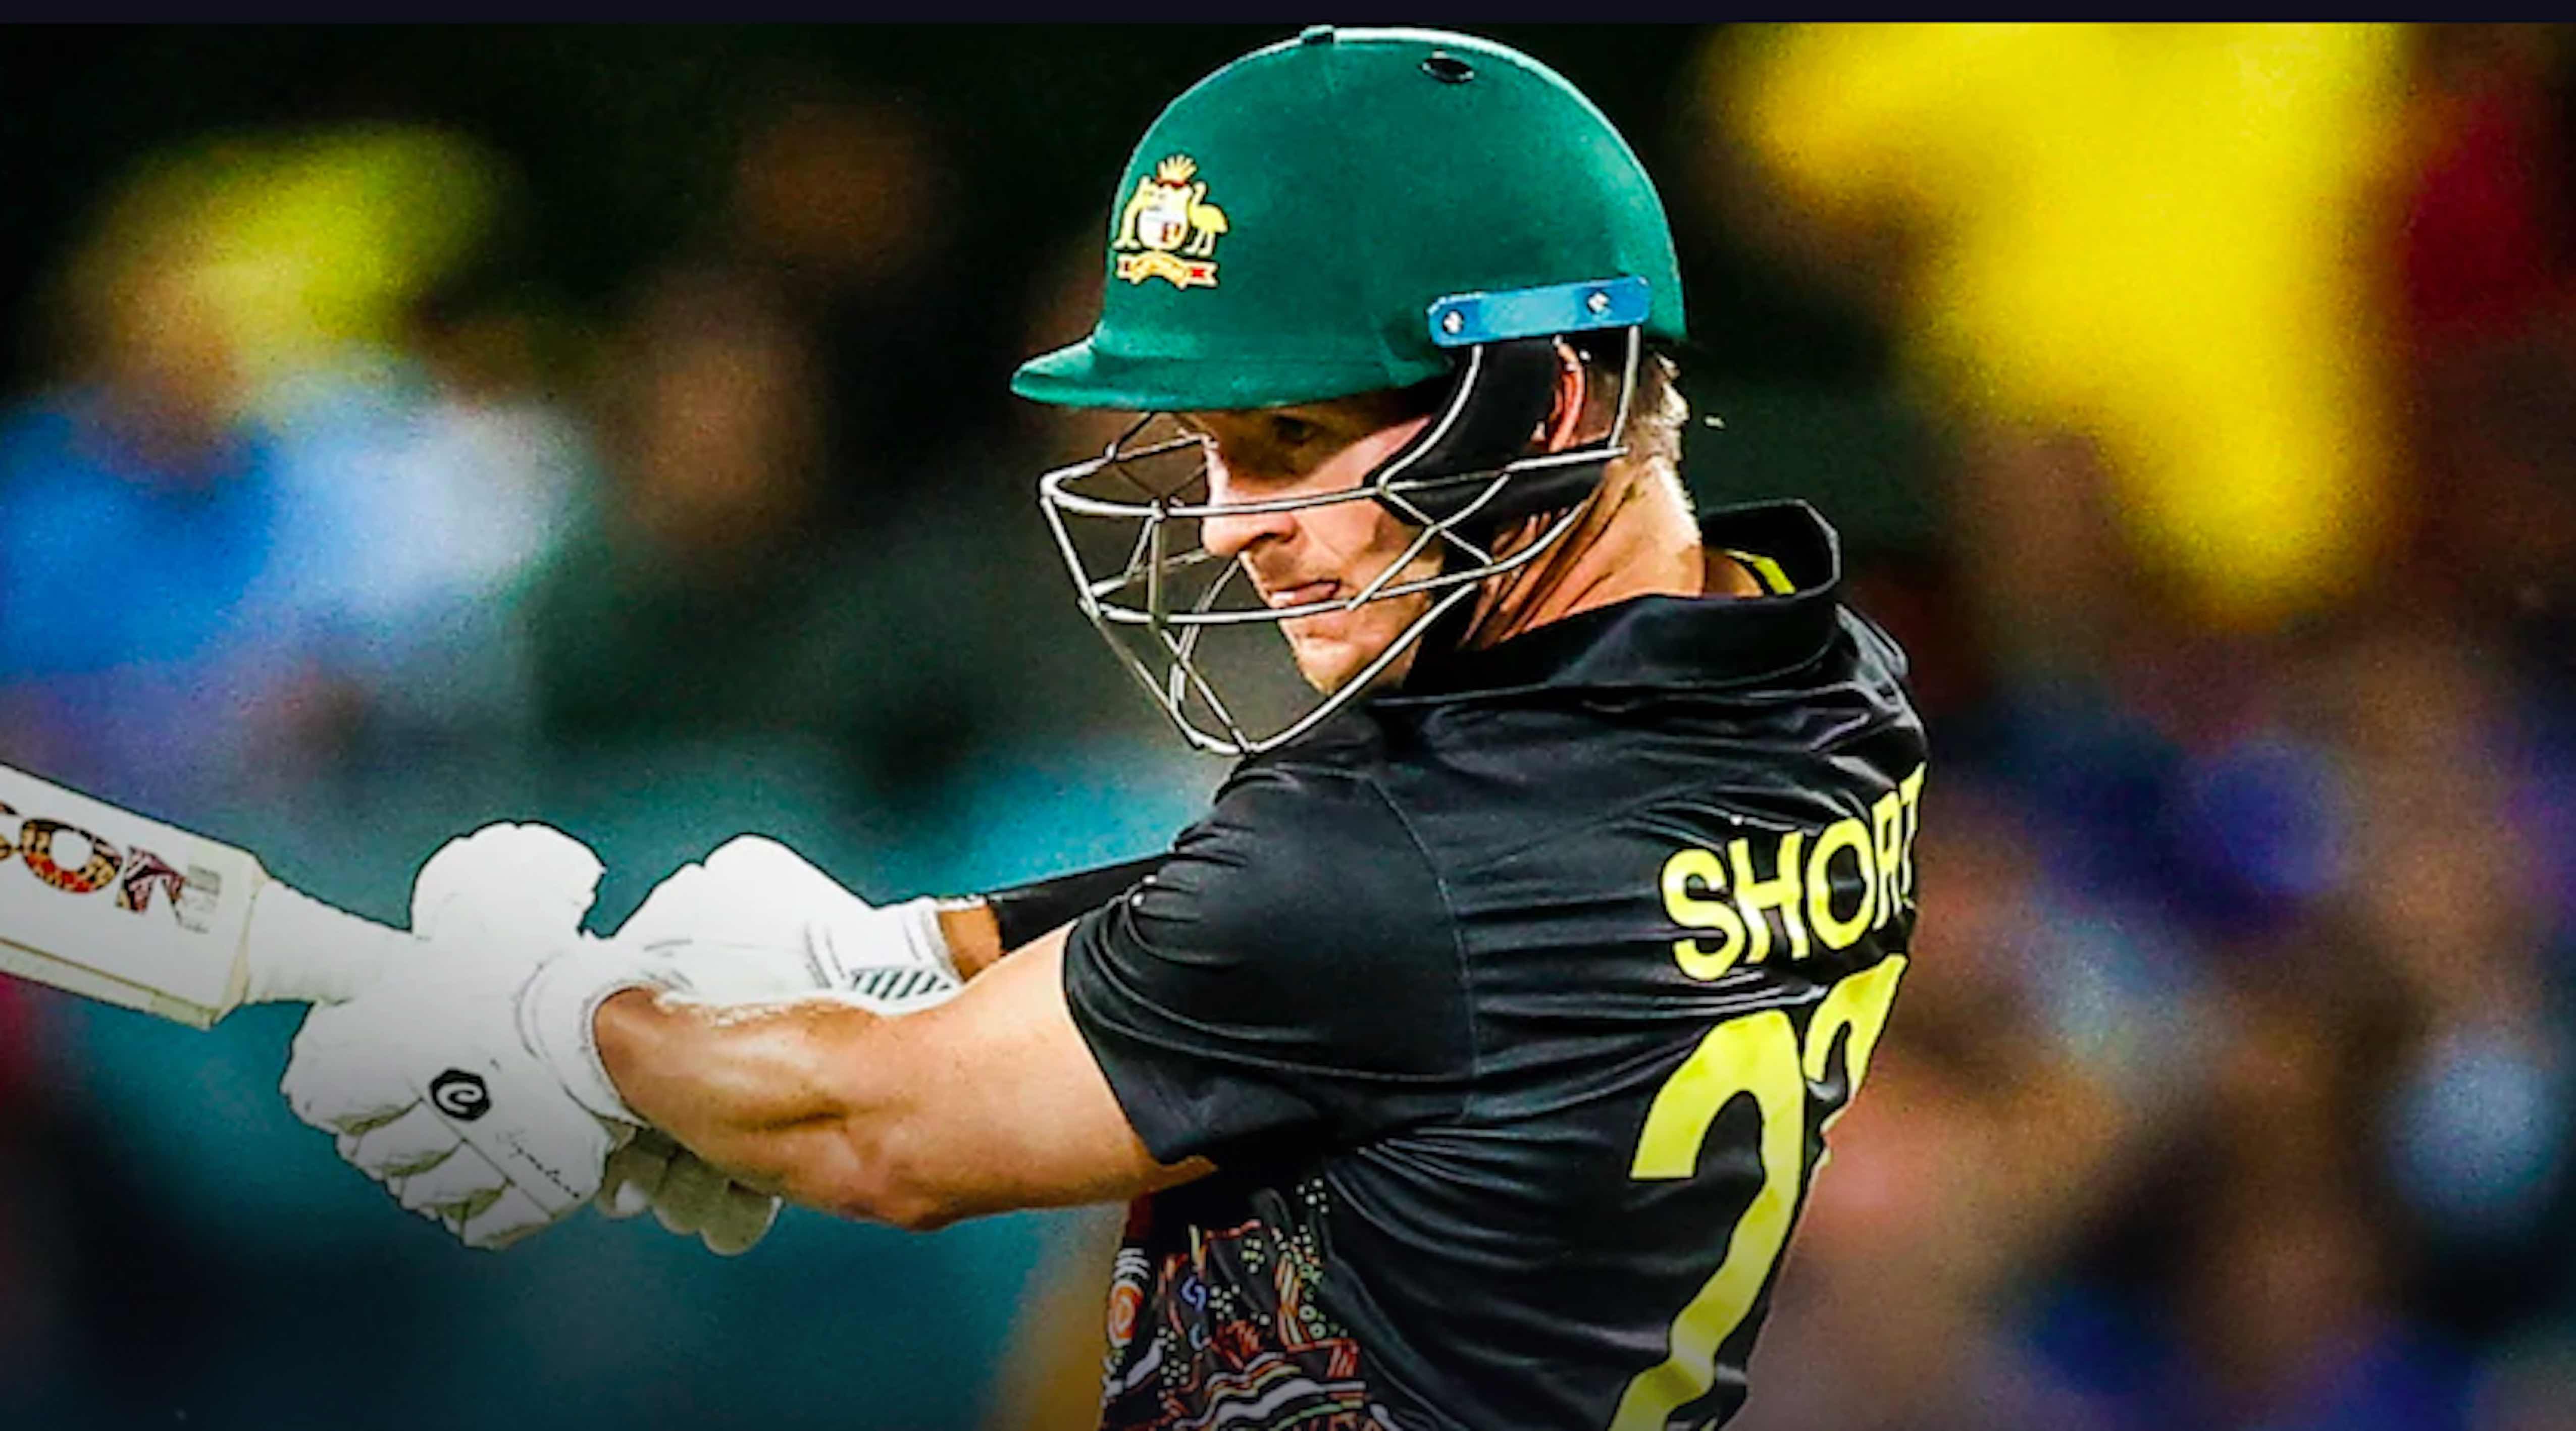 Watch Australia vs India T20 Game 2 live and free